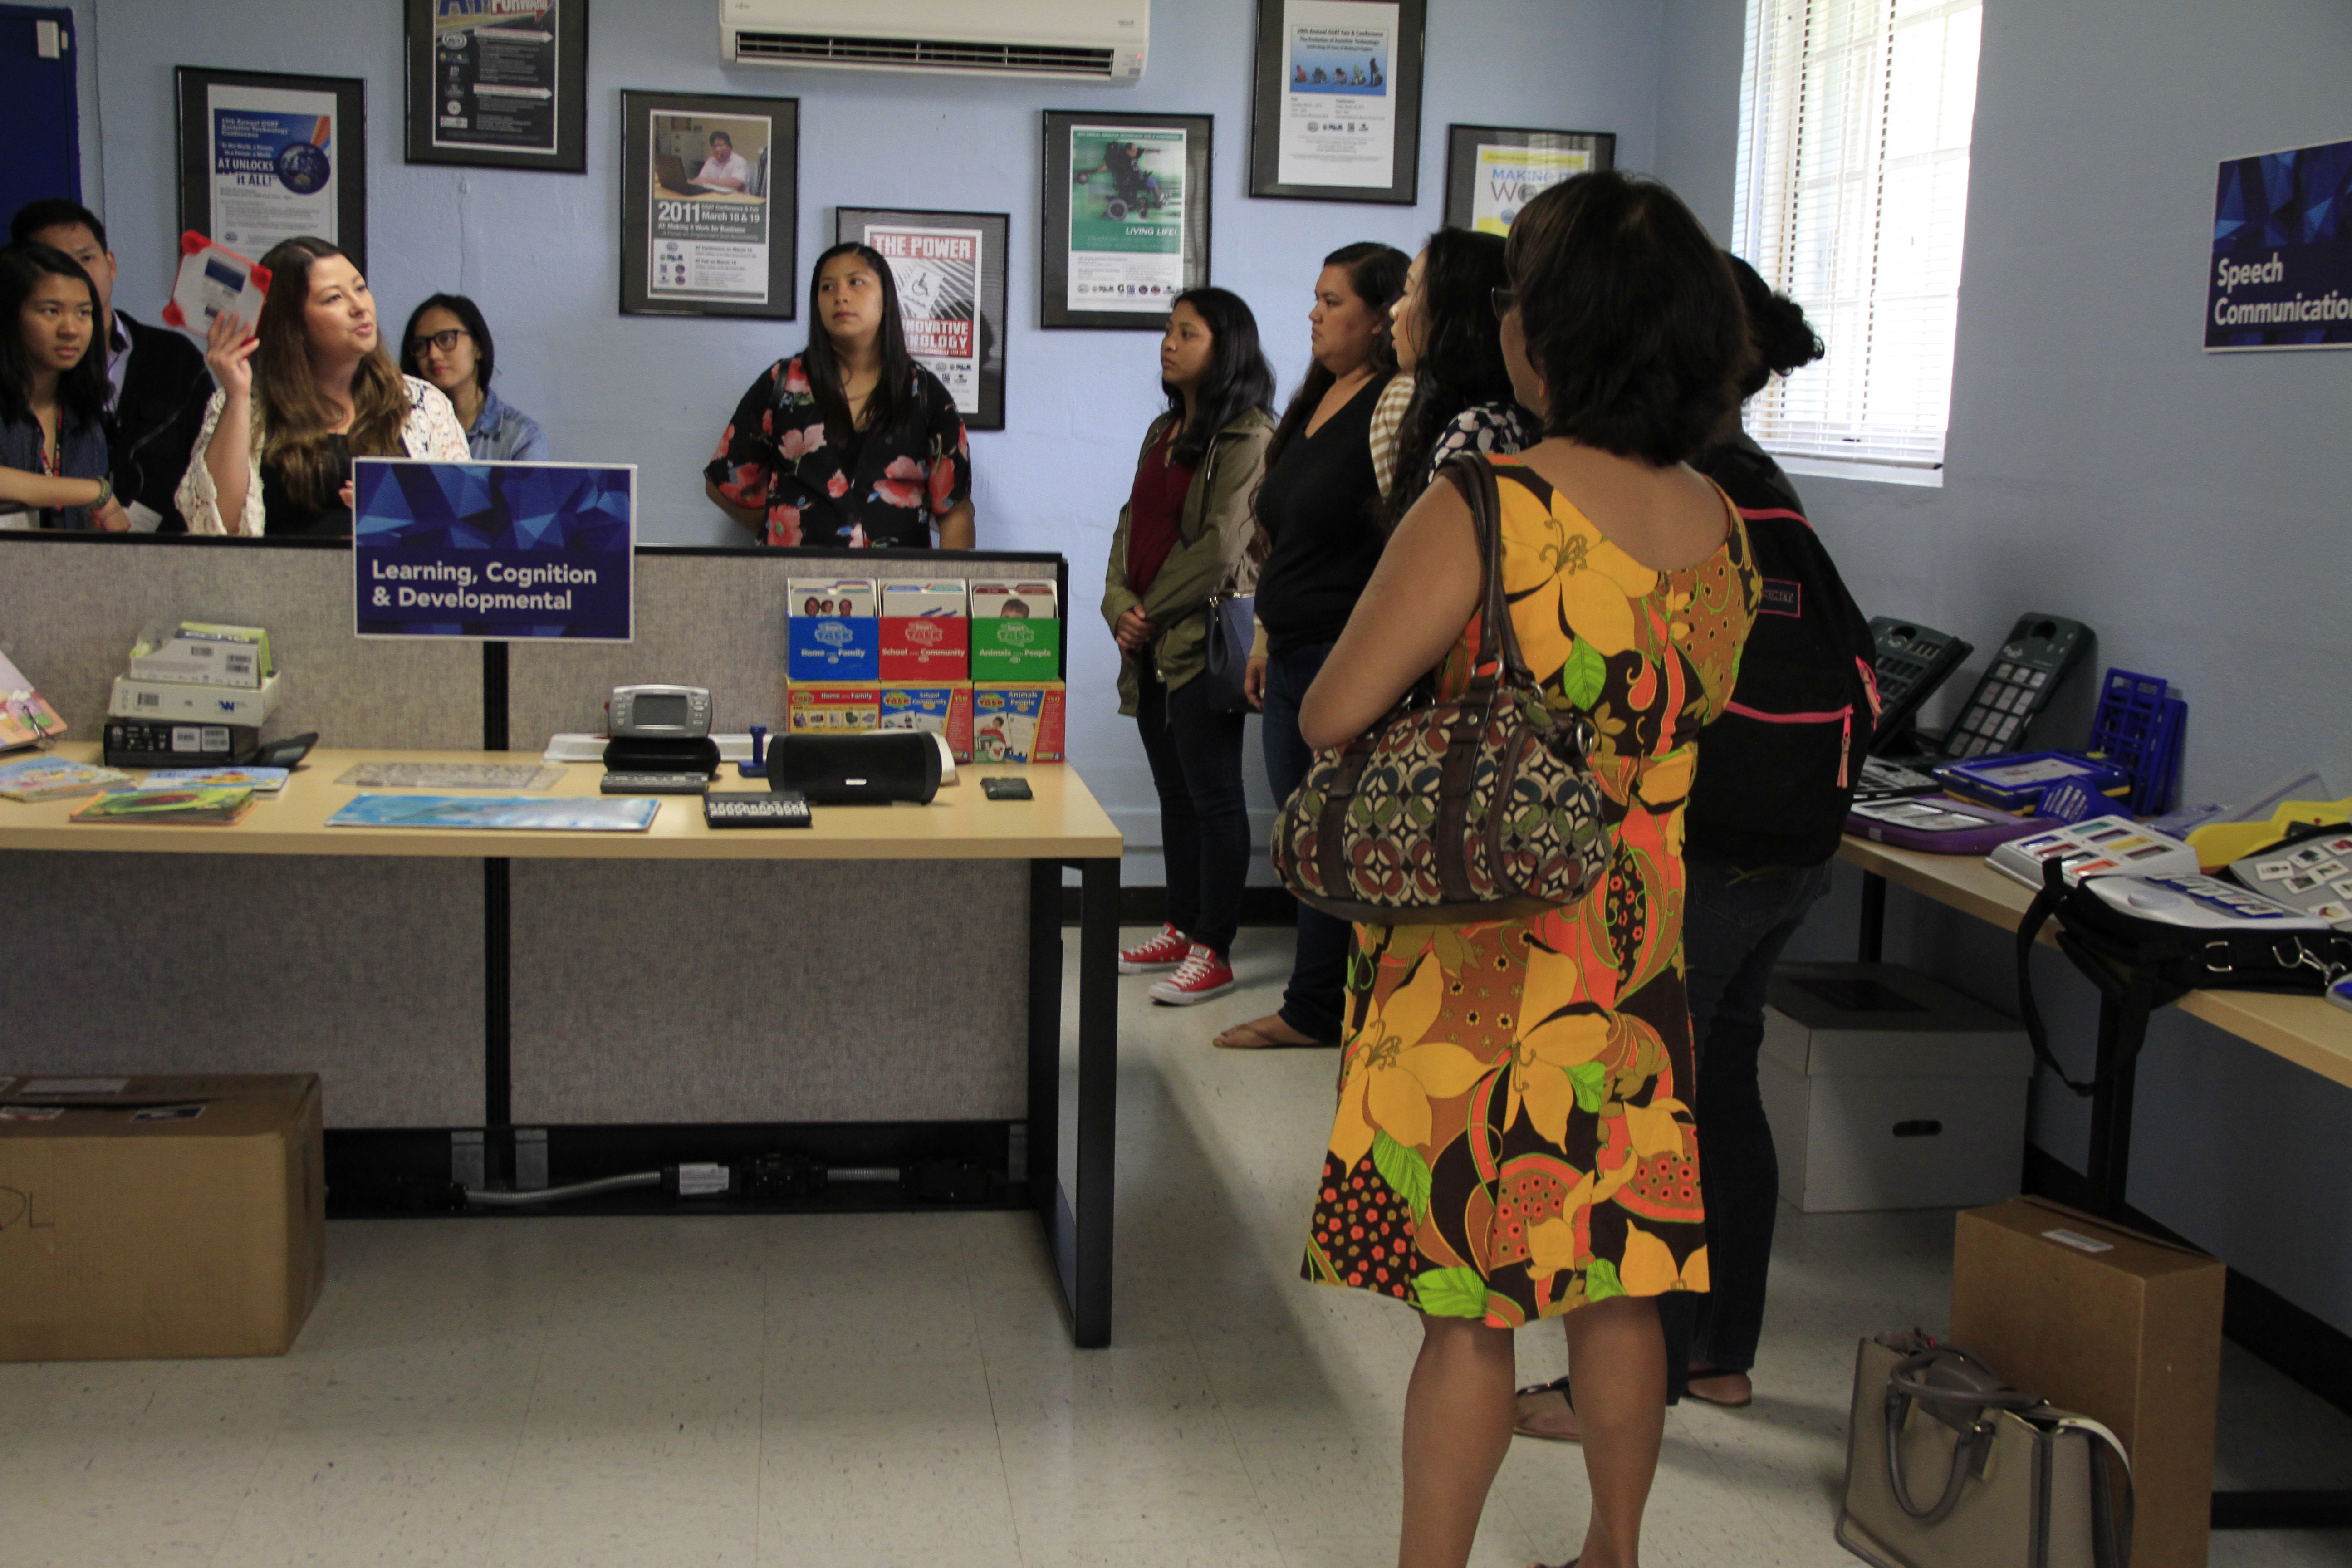 On April 7, Carla Torres, Assistive Technology & Special Projects Program Coordinator, delivered a presentation on Assistive Technology to 9 students enrolled in ED 220:  Human Growth and Development at Guam Community College taught by Vera De Oro.